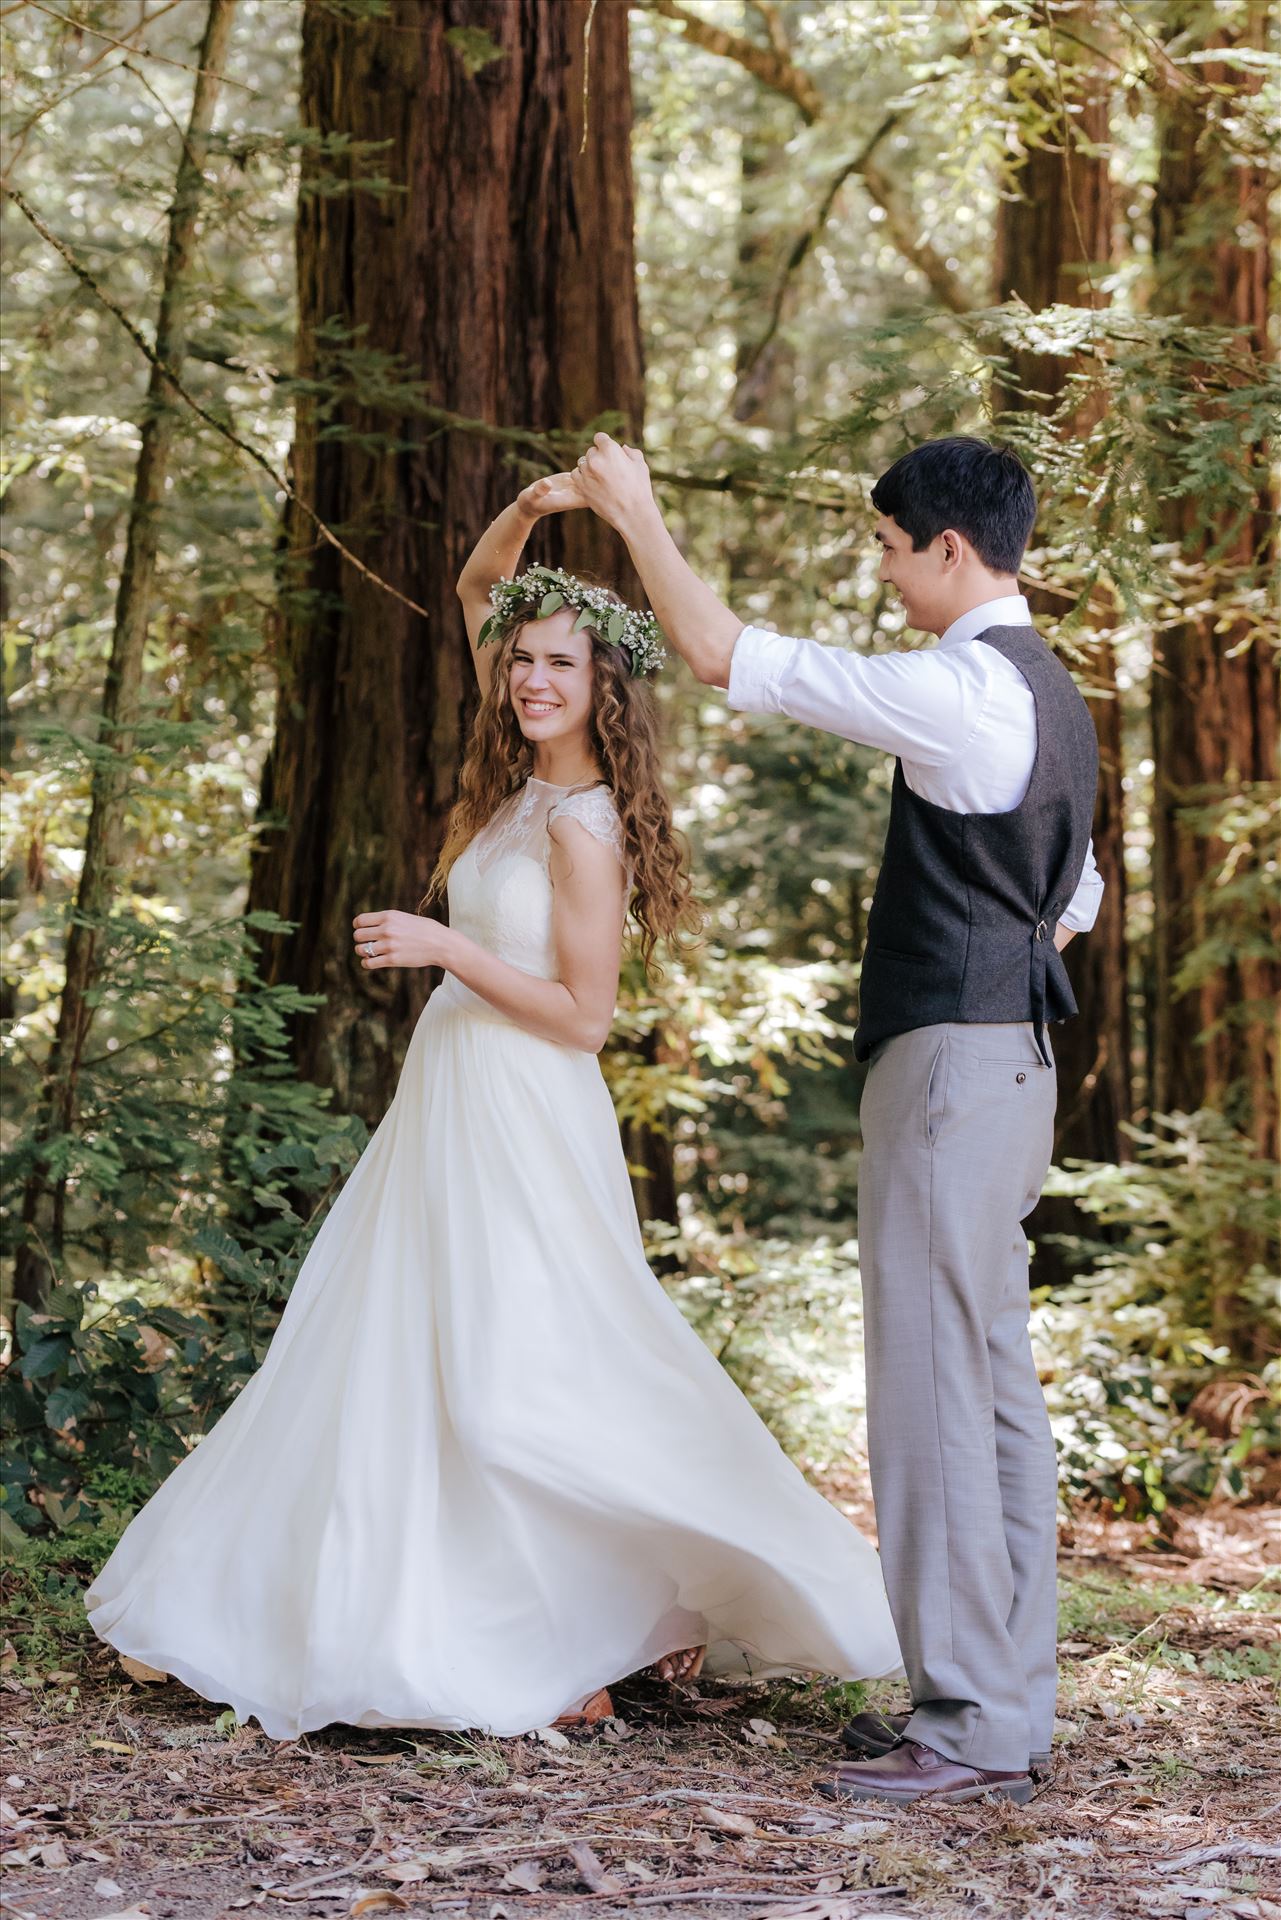 FW-6667.JPG - Mt Madonna wedding in the redwoods outside of Watsonville, California with a romantic and classic vibe by sarah williams of mirror's edge photography a san luis obispo wedding photographer.  Bride and Groom dancing in the forest by Sarah Williams